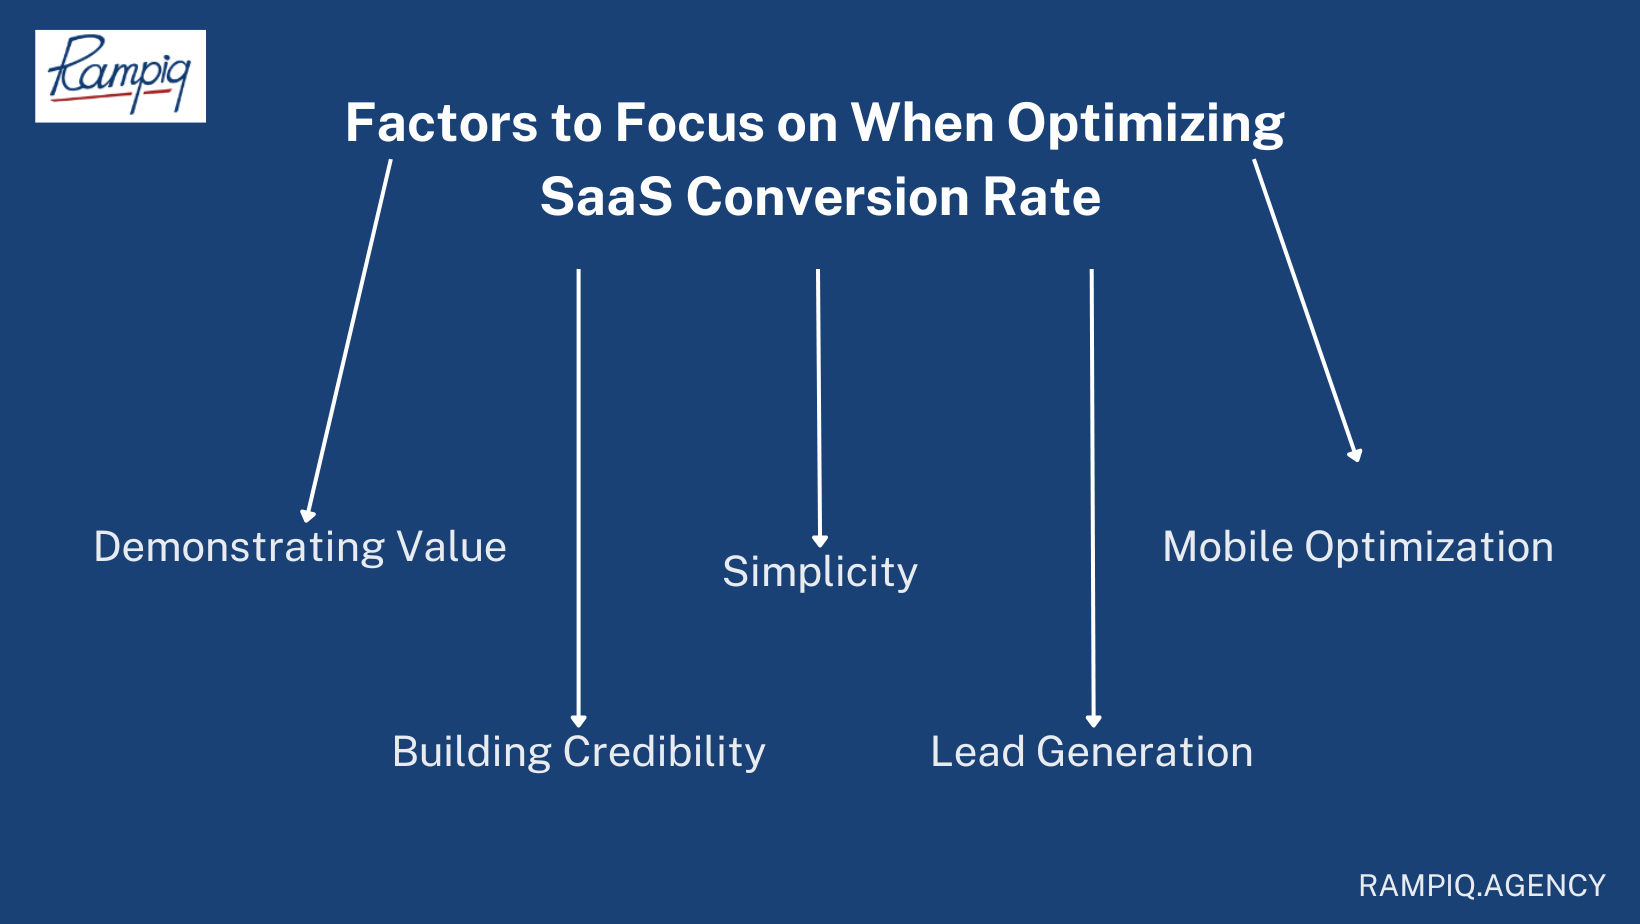 Factors to Focus on When Optimizing SaaS Conversion Rate